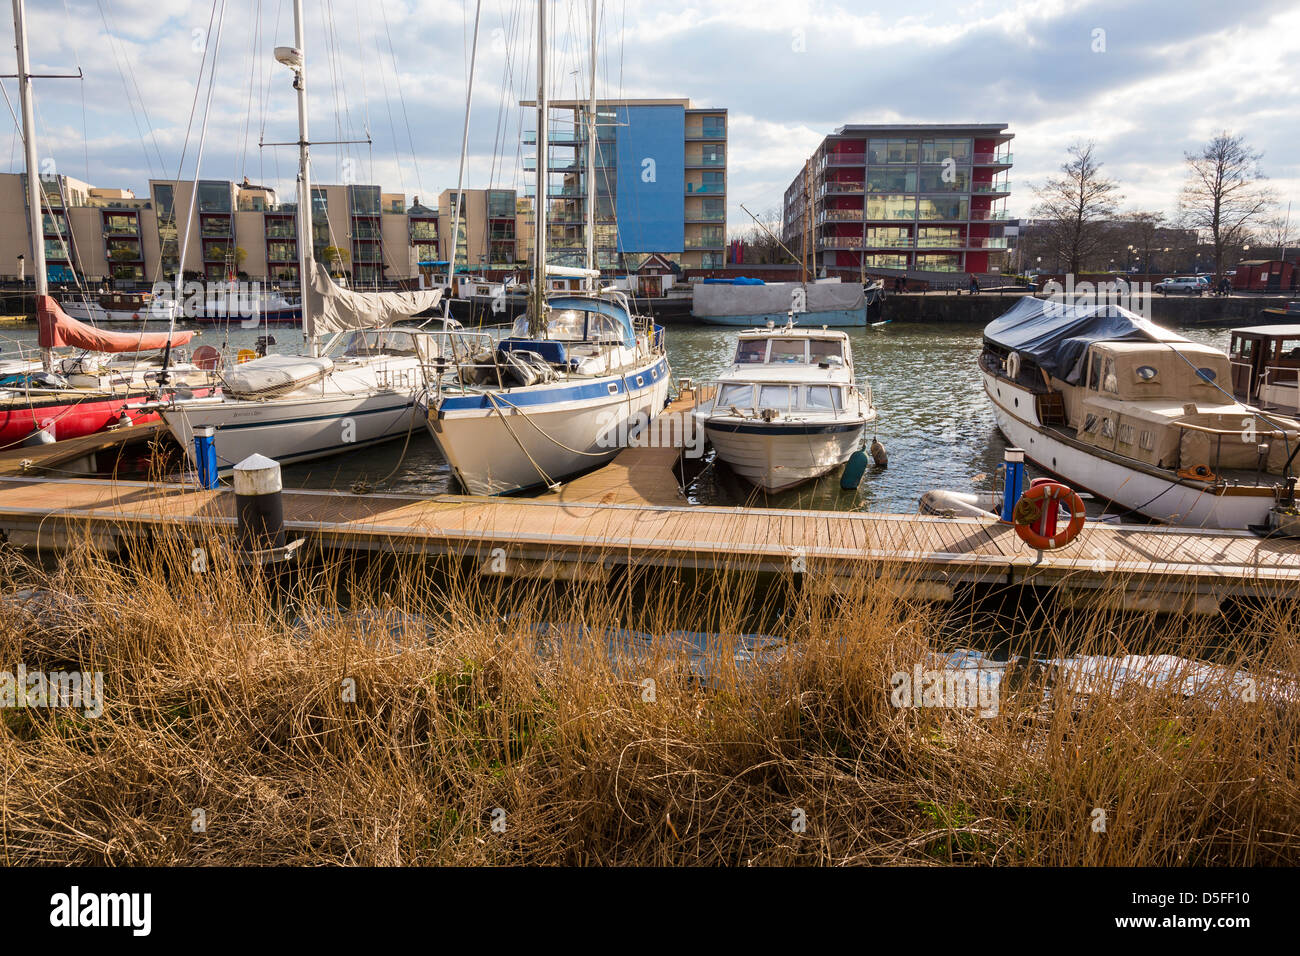 Boats moored on the River Avon in the centre of Bristol, UK Stock Photo